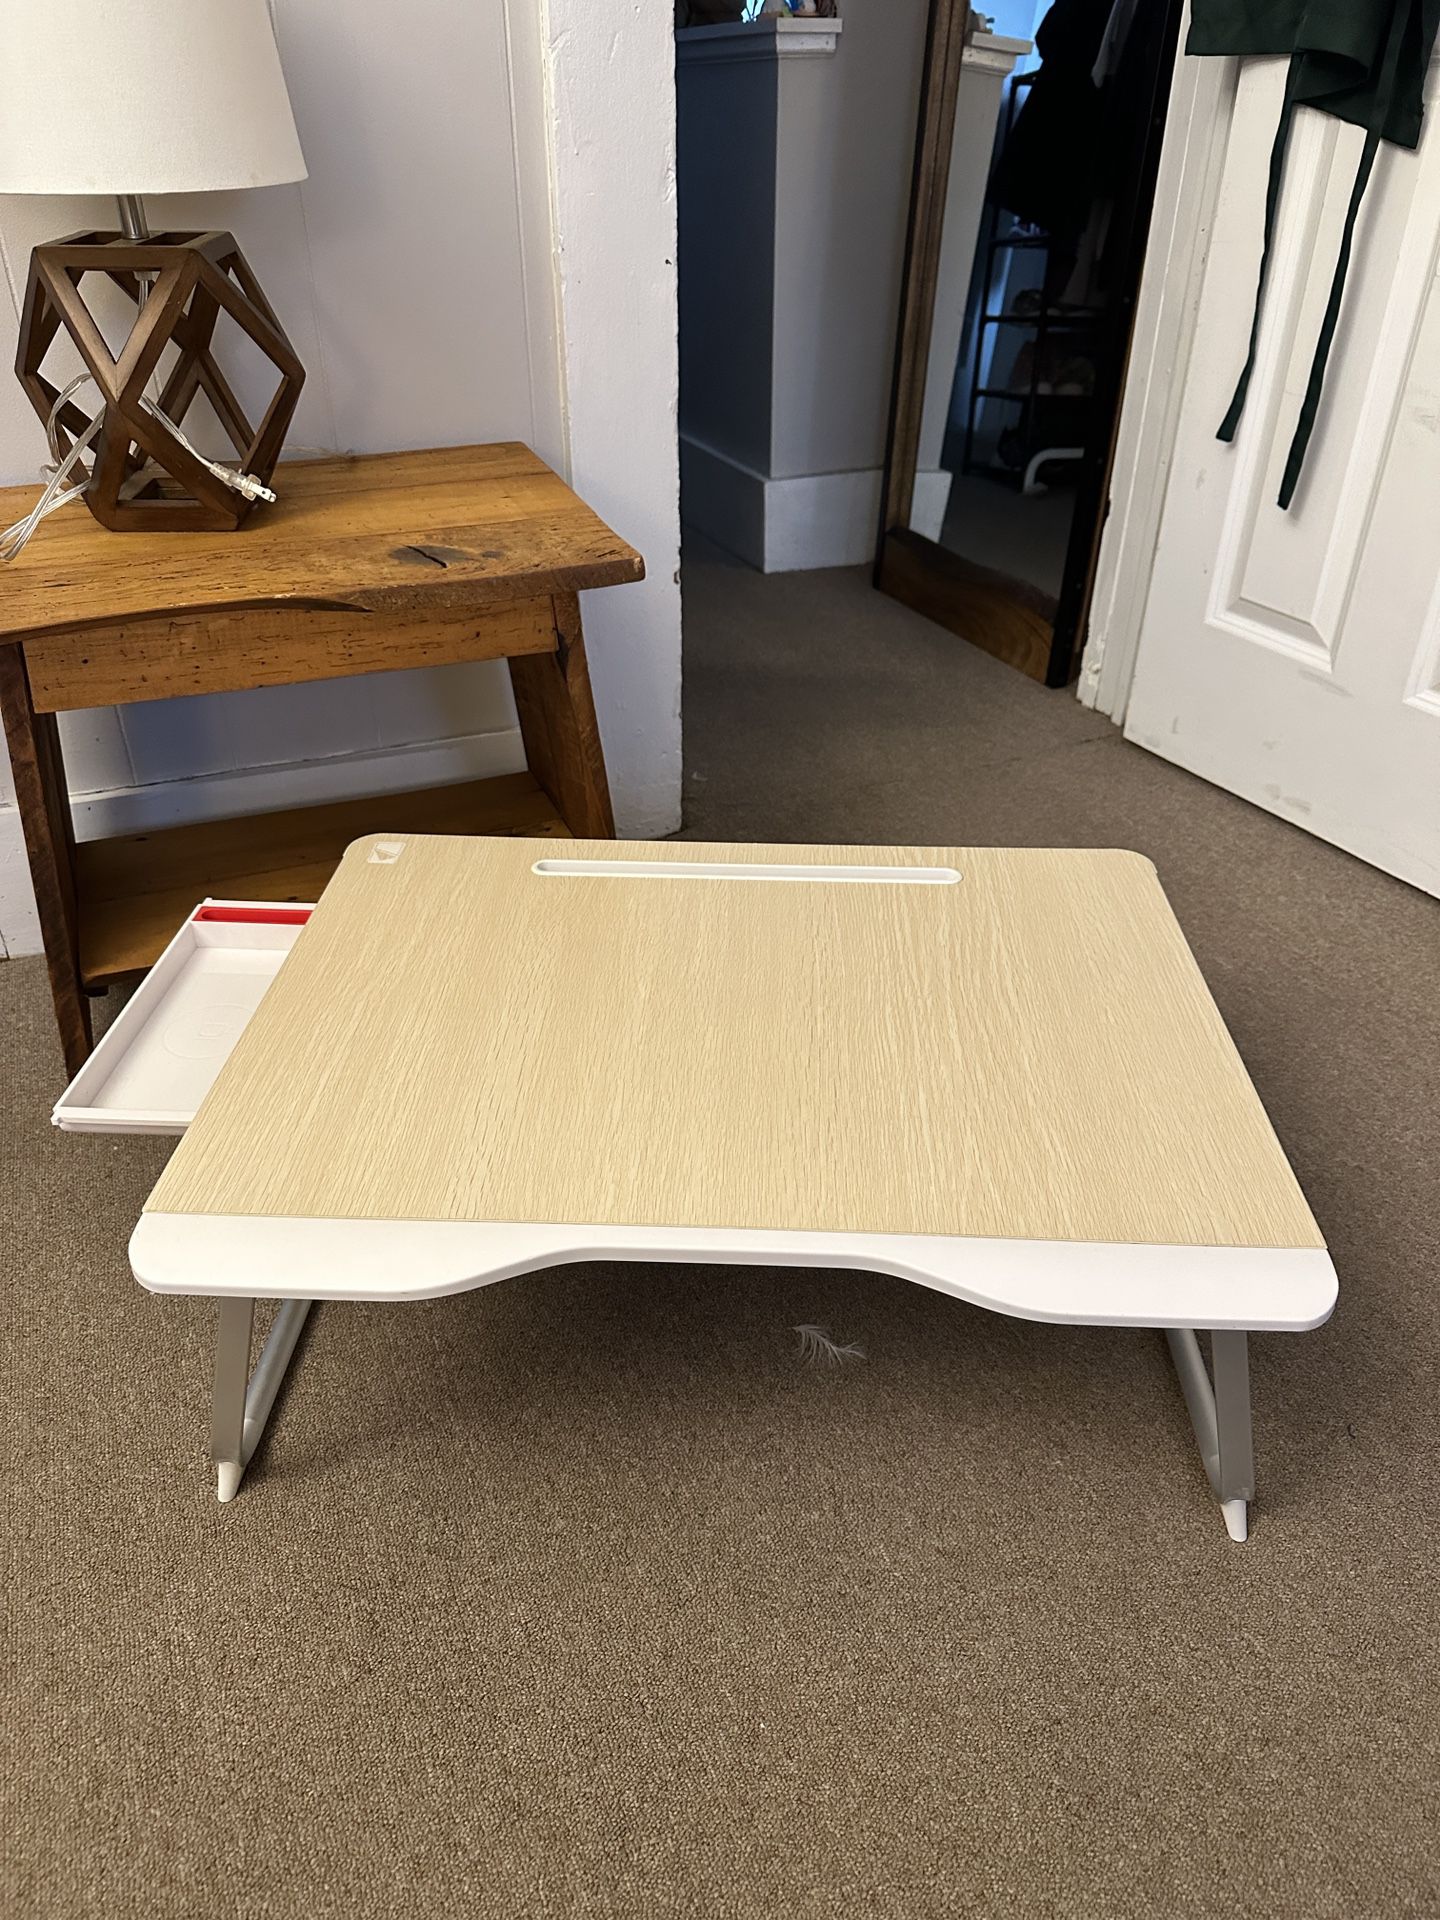 Foldable Laptop and Bed Table with Storage